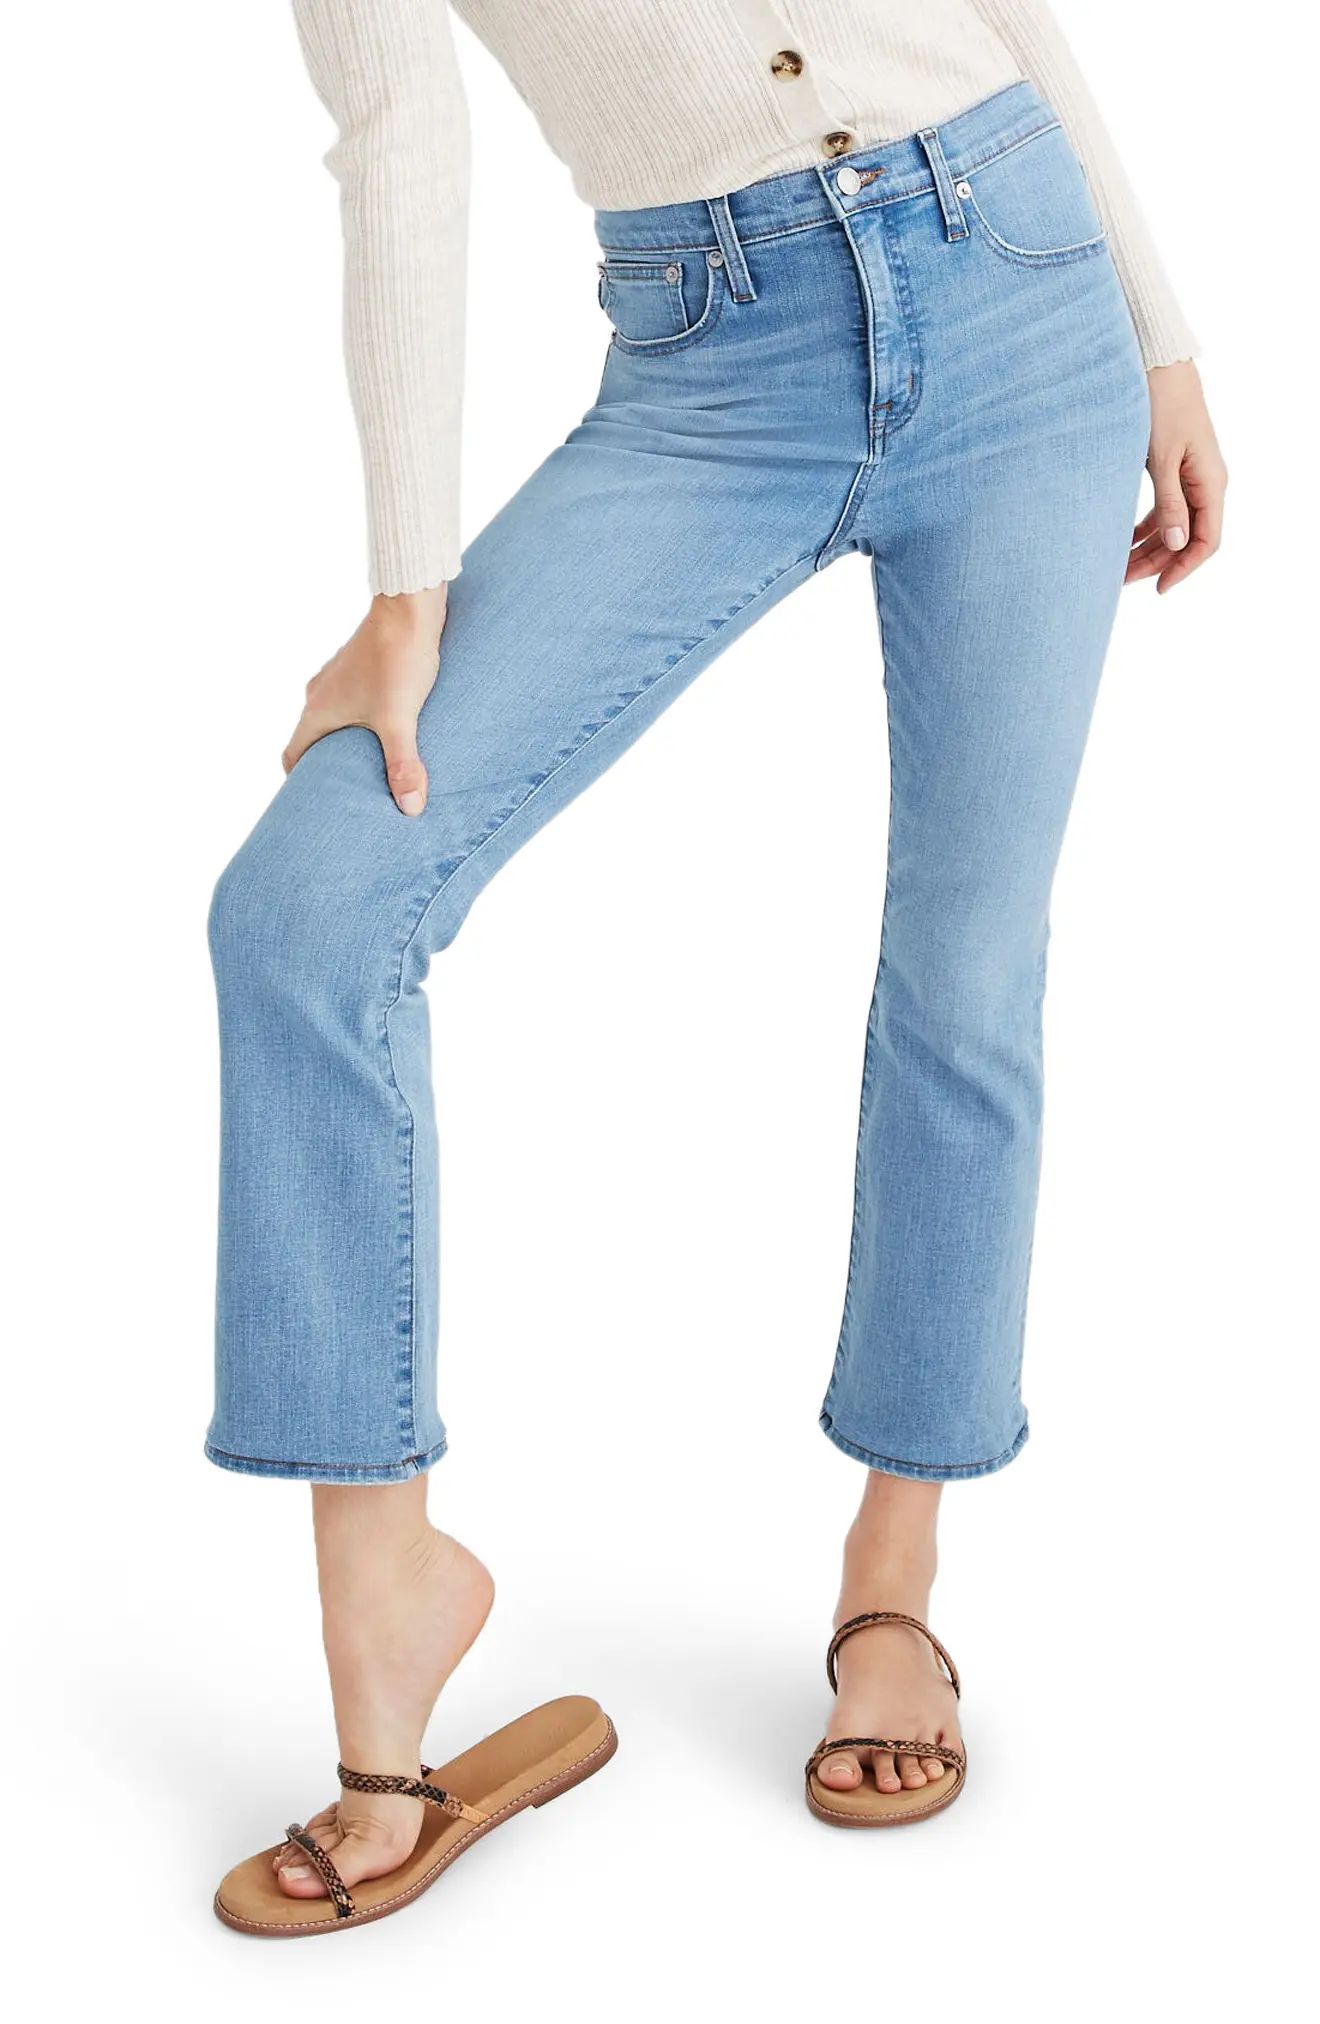 Madewell Cali Demi-Boot Jeans with CoolmaxÂ® Denim at Nordstrom Rack | Nordstrom Rack